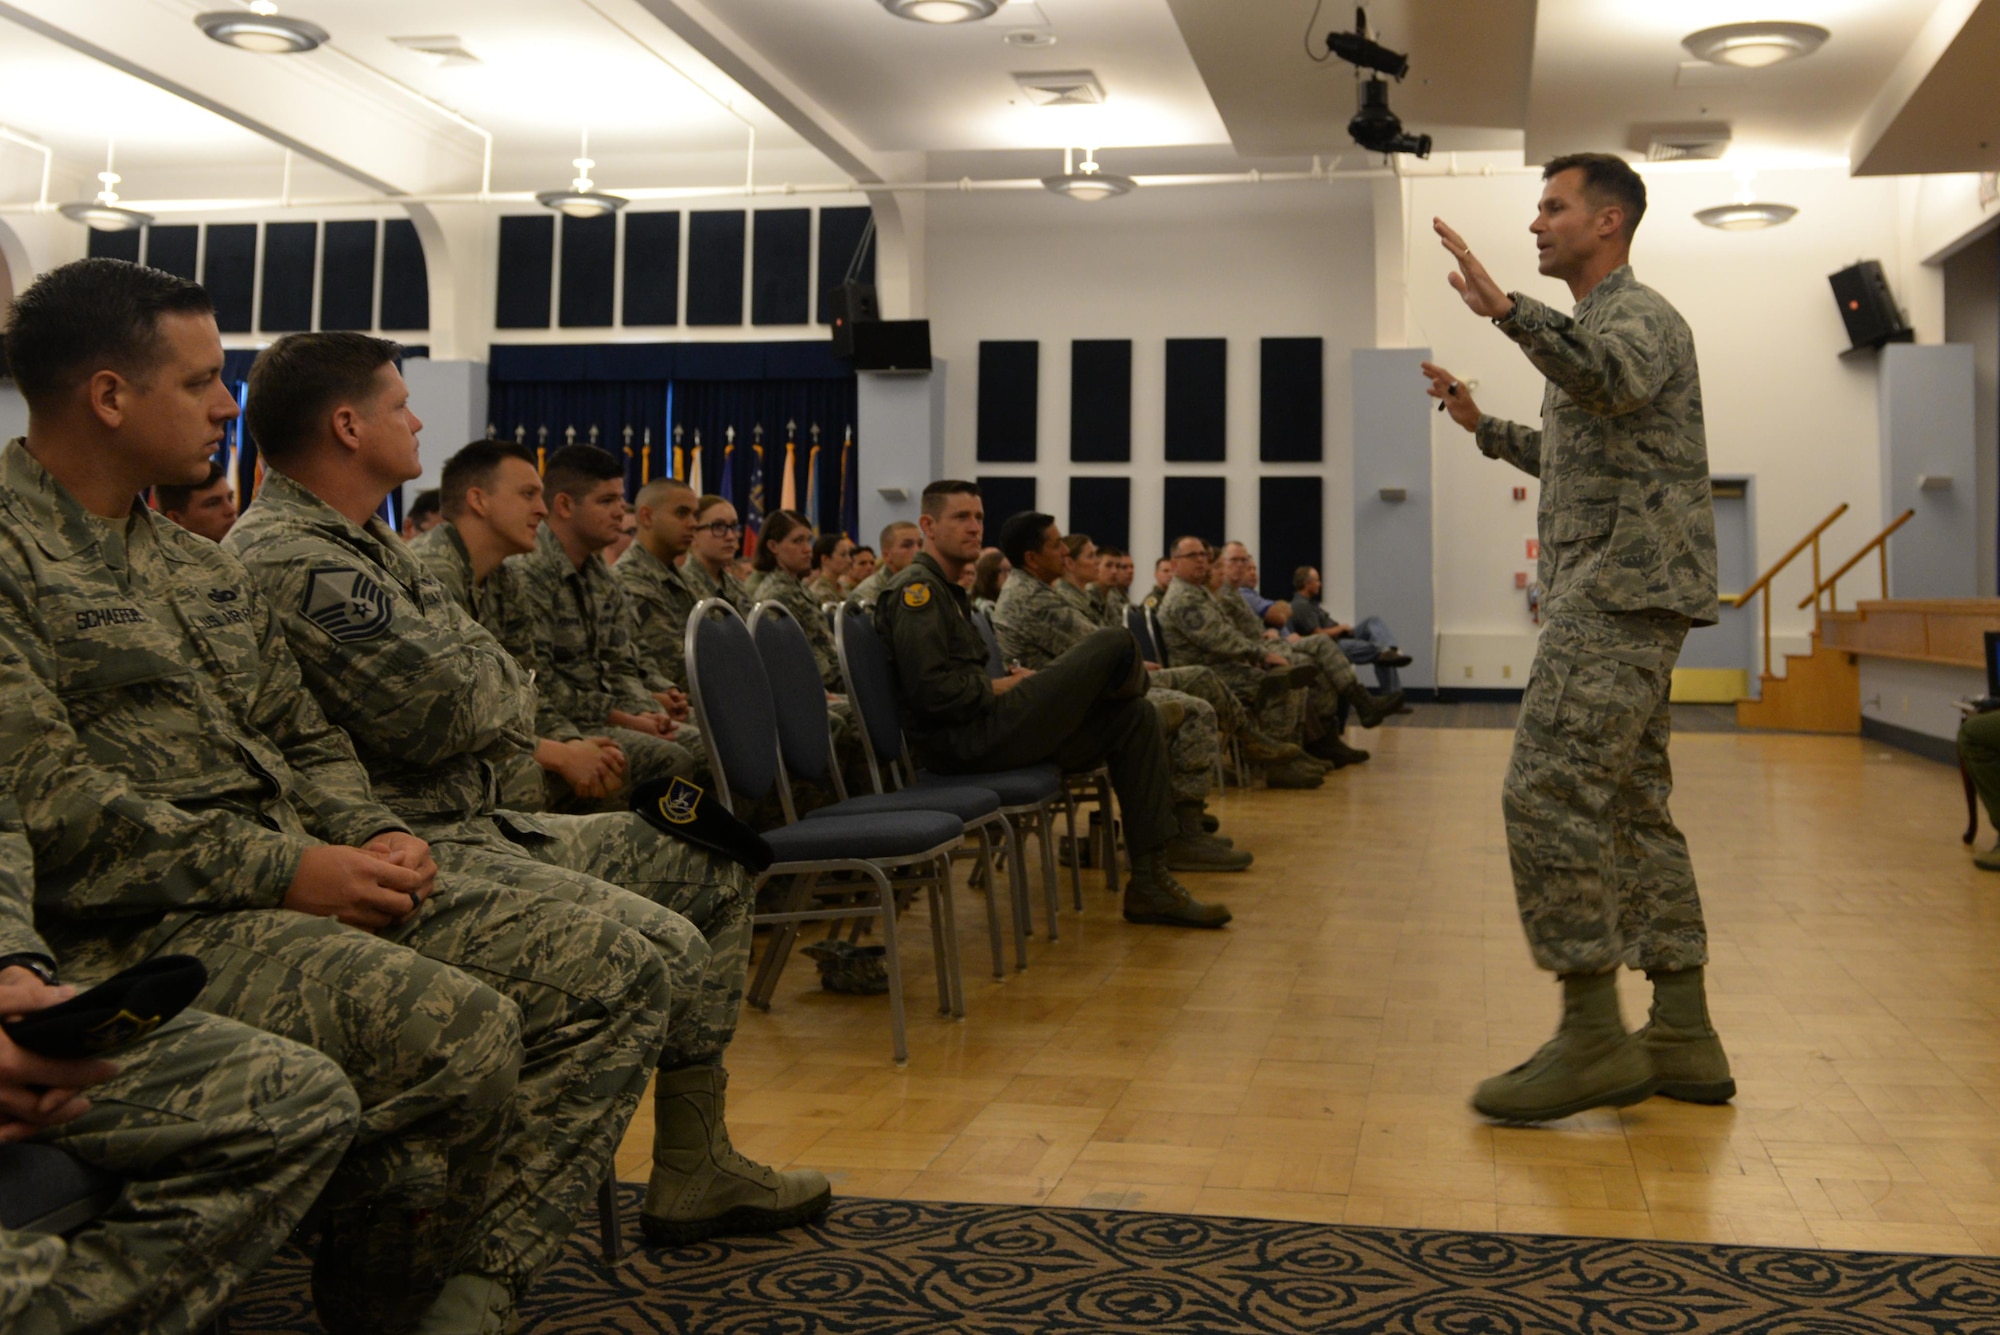 Col. Larry Broadwell, 9th Reconnaissance Wing commander, speaks to Team Beale during a commander’s call July 22, 2016, at Beale Air Force Base, California. Broadwell took this opportunity to meet with Airmen and share his vision for the 9th RW and the future of the high-altitude intelligence, surveillance and reconnaissance. (U.S. Air Force photo by Senior Airman Ramon A. Adelan)